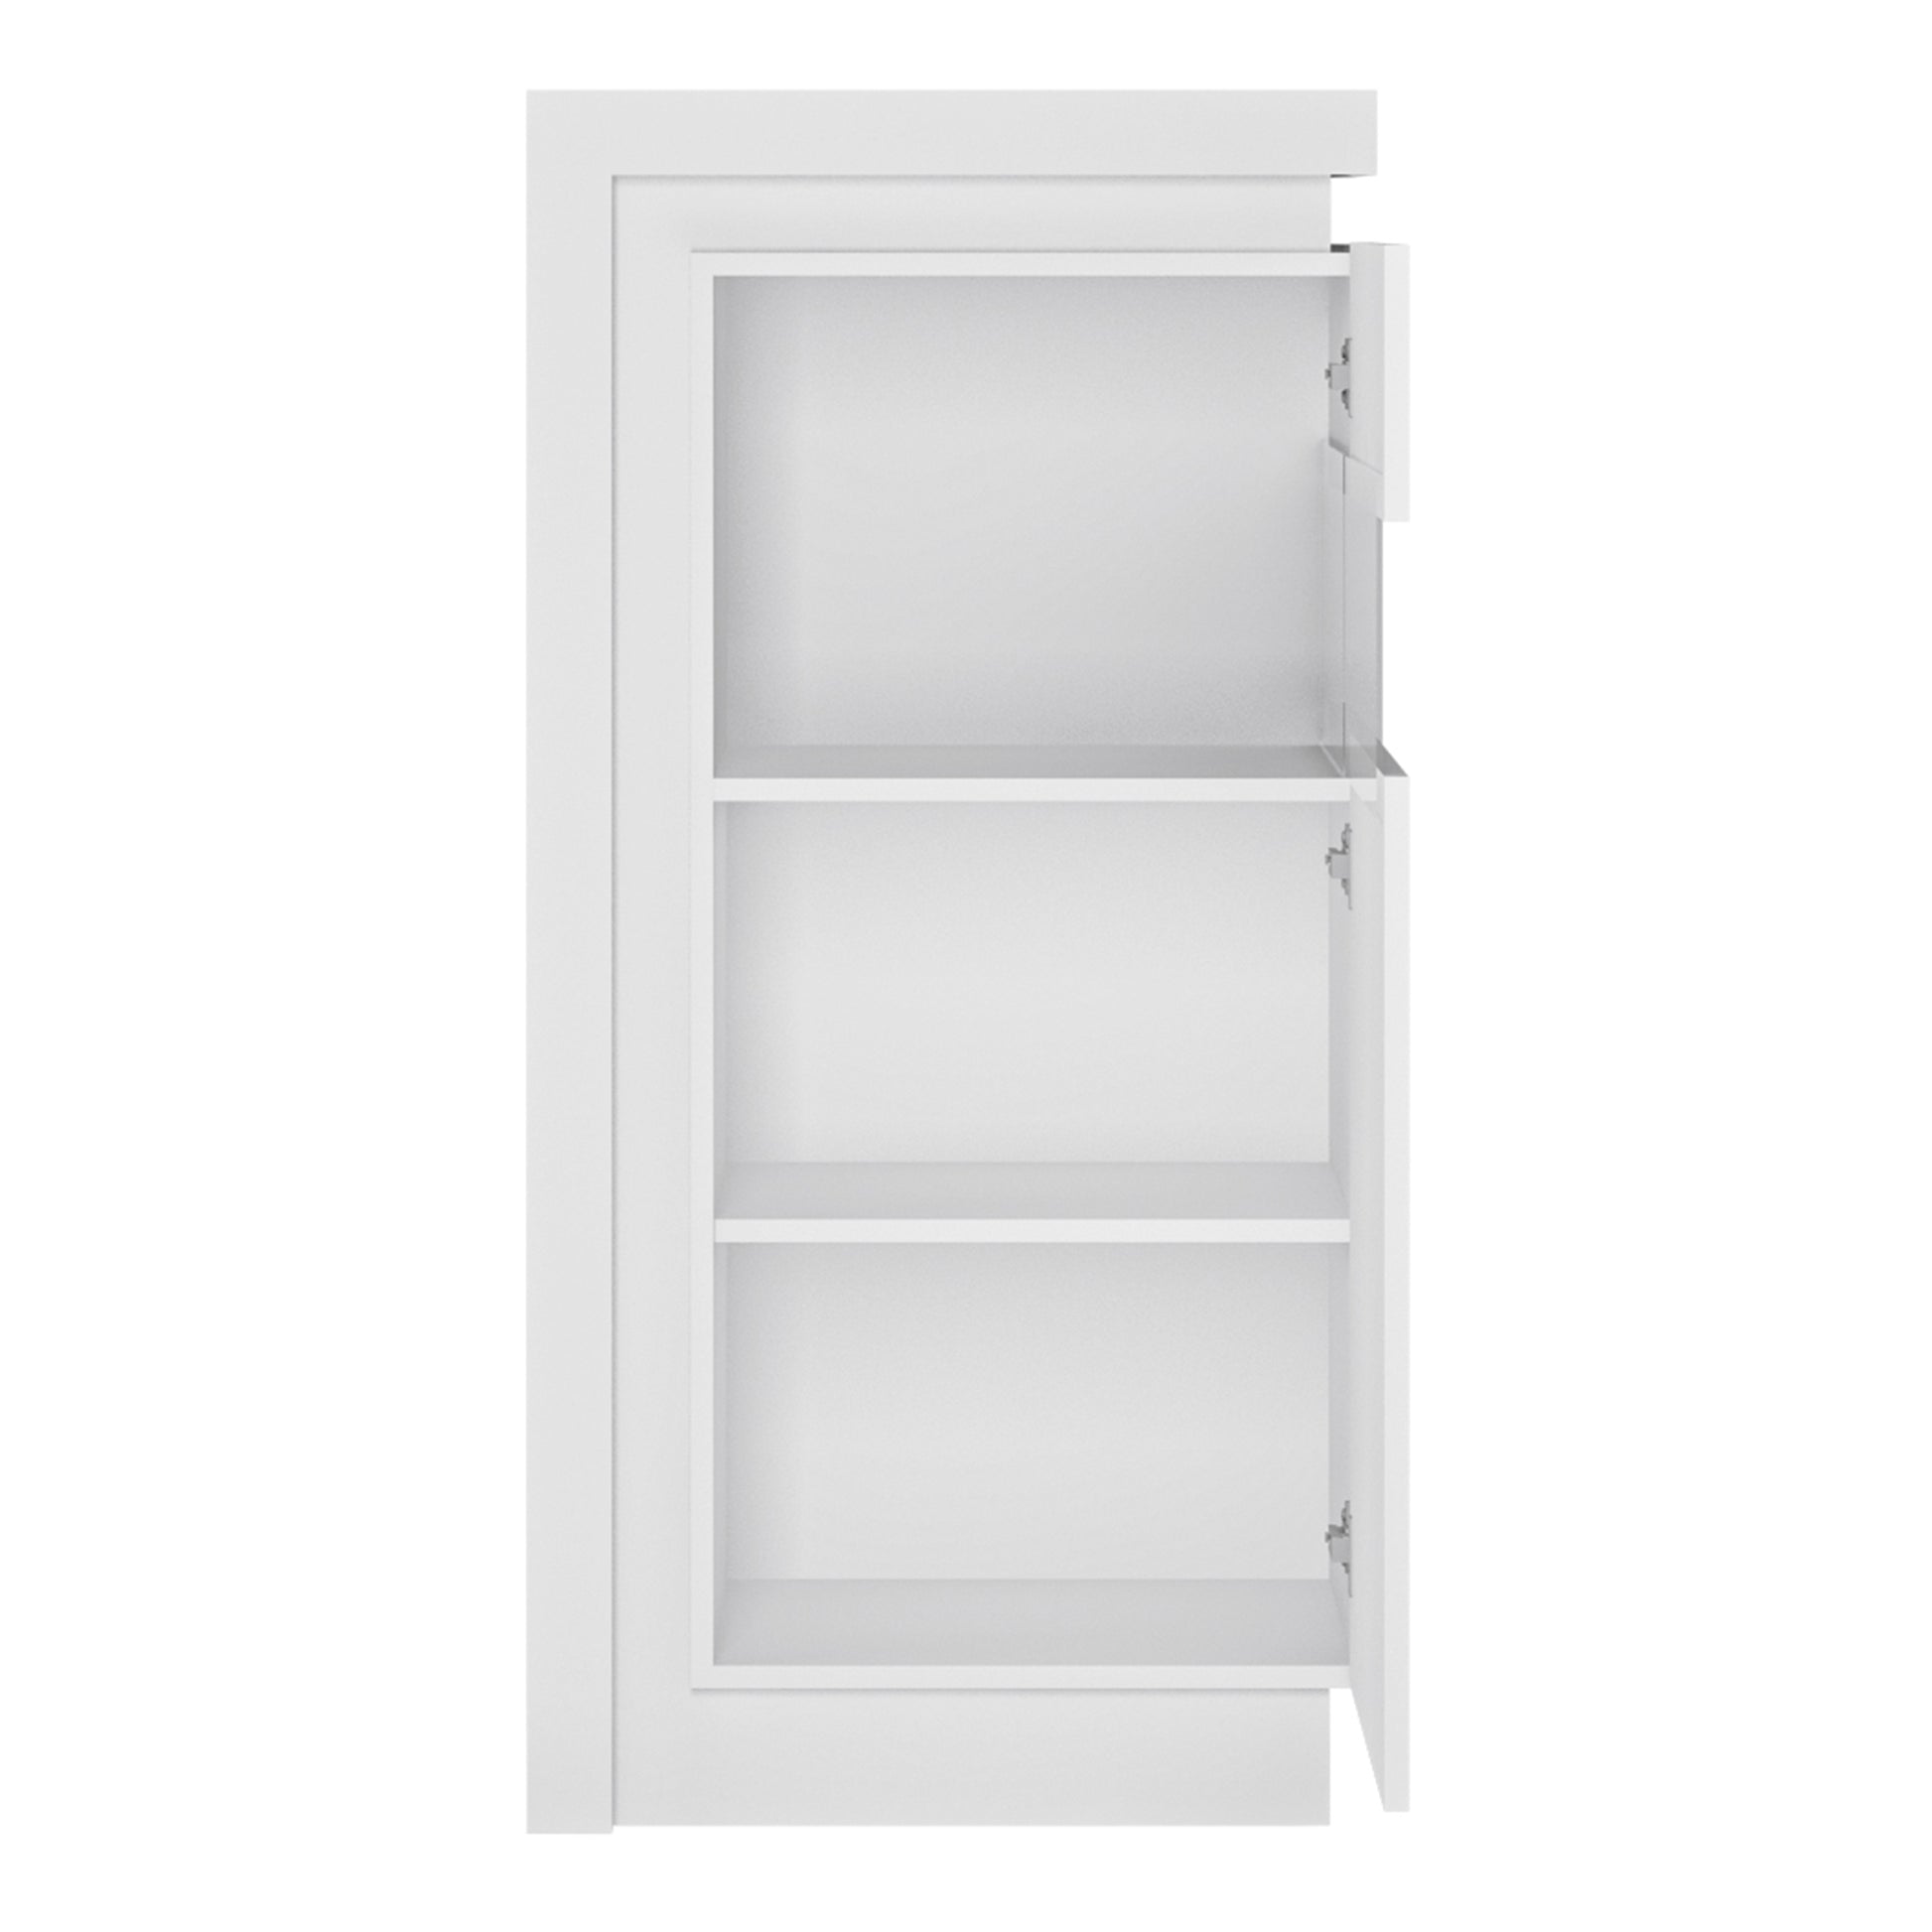 Lyon  Narrow display cabinet (RHD) 123.6cm high (including LED lighting) in White and High Gloss